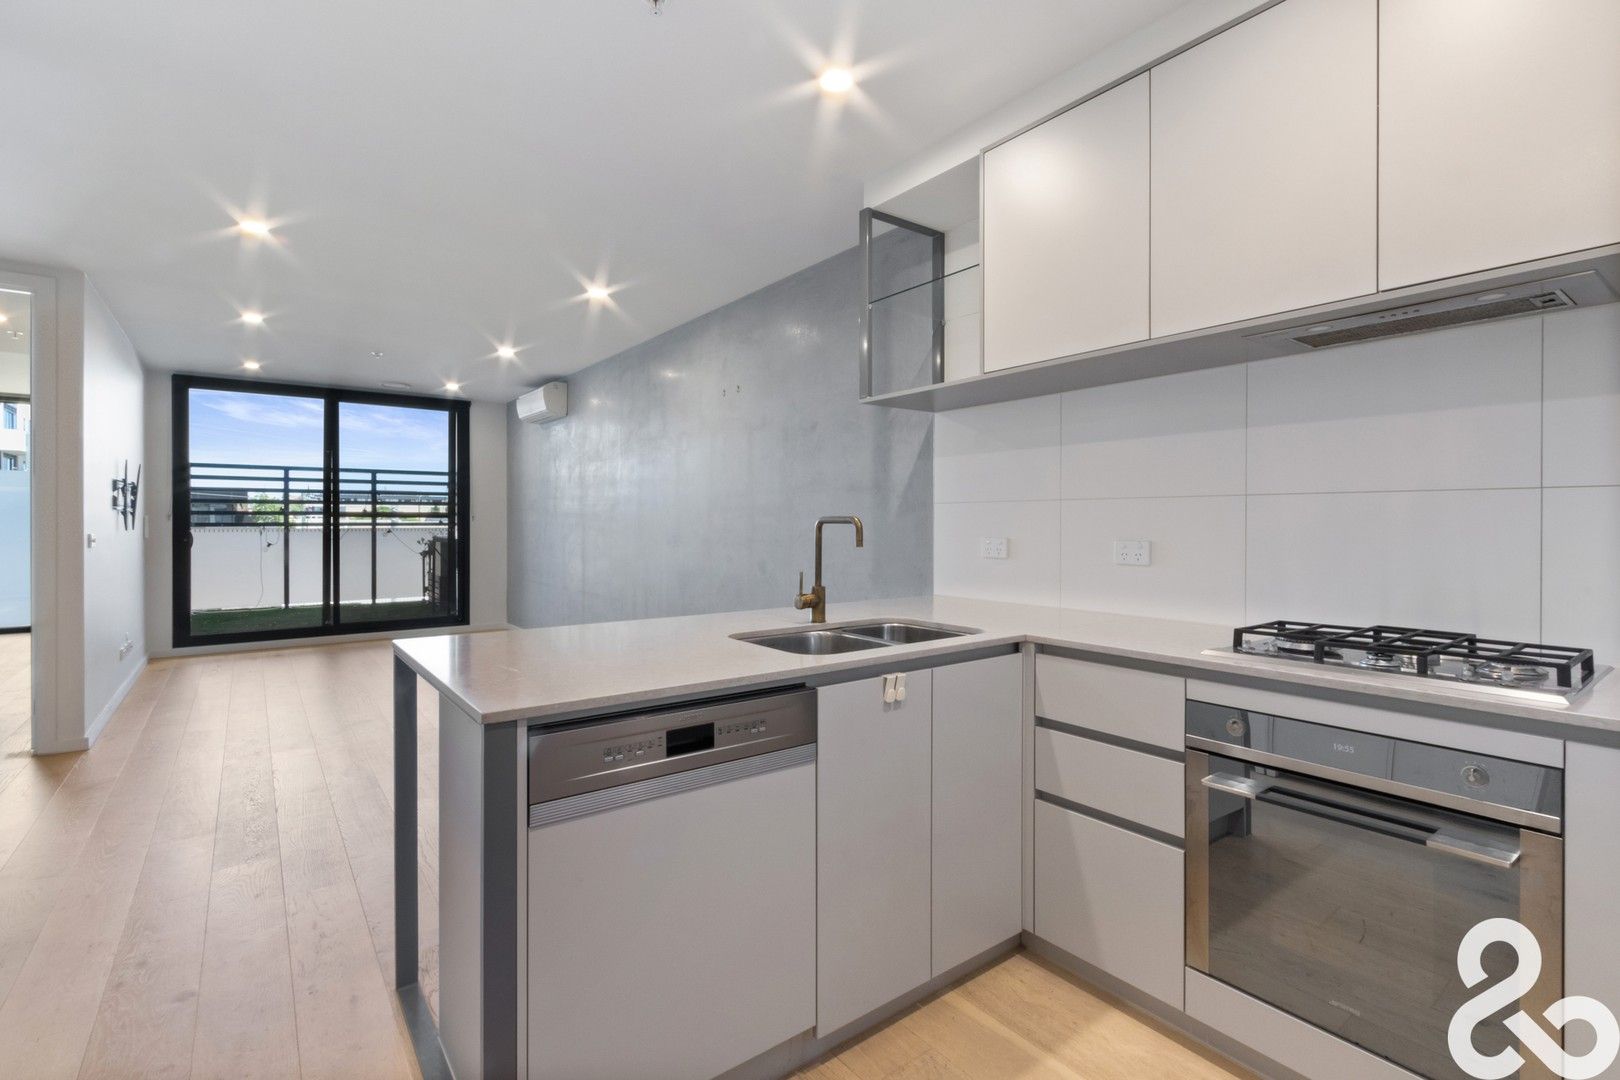 2 bedrooms Apartment / Unit / Flat in 211/5 Beavers Road NORTHCOTE VIC, 3070